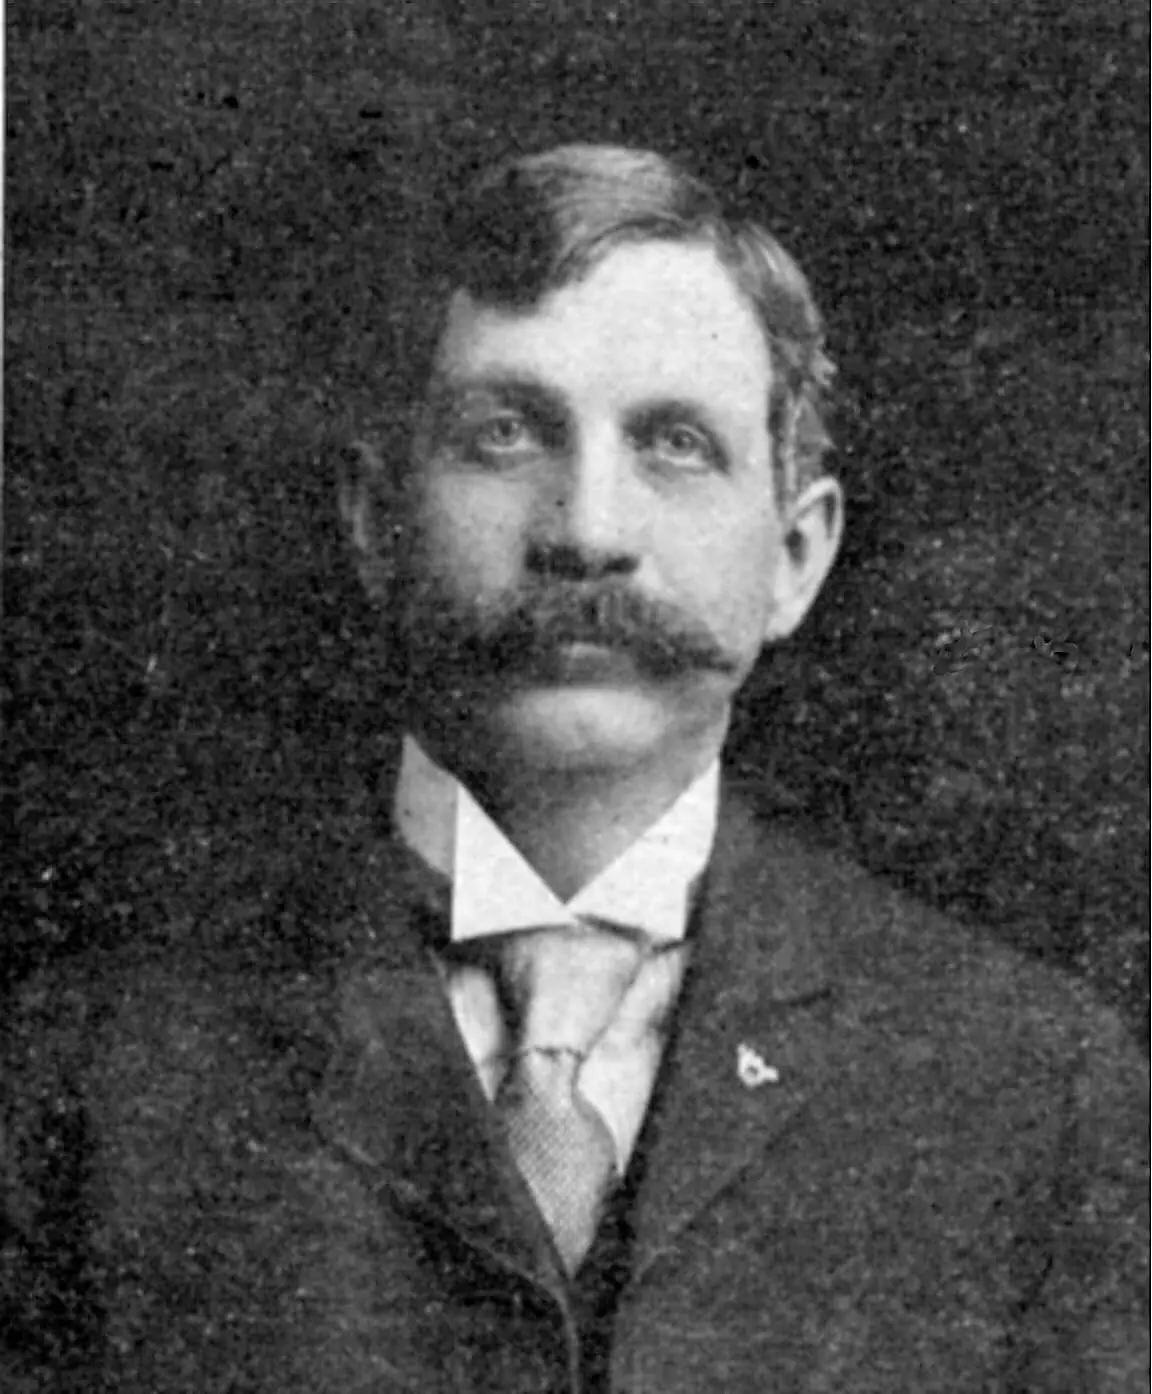 A white man with left-parted hair and a large mustache looks directly into the camera. He is wearing a double-breasted jacket, collared shirt, and tie.